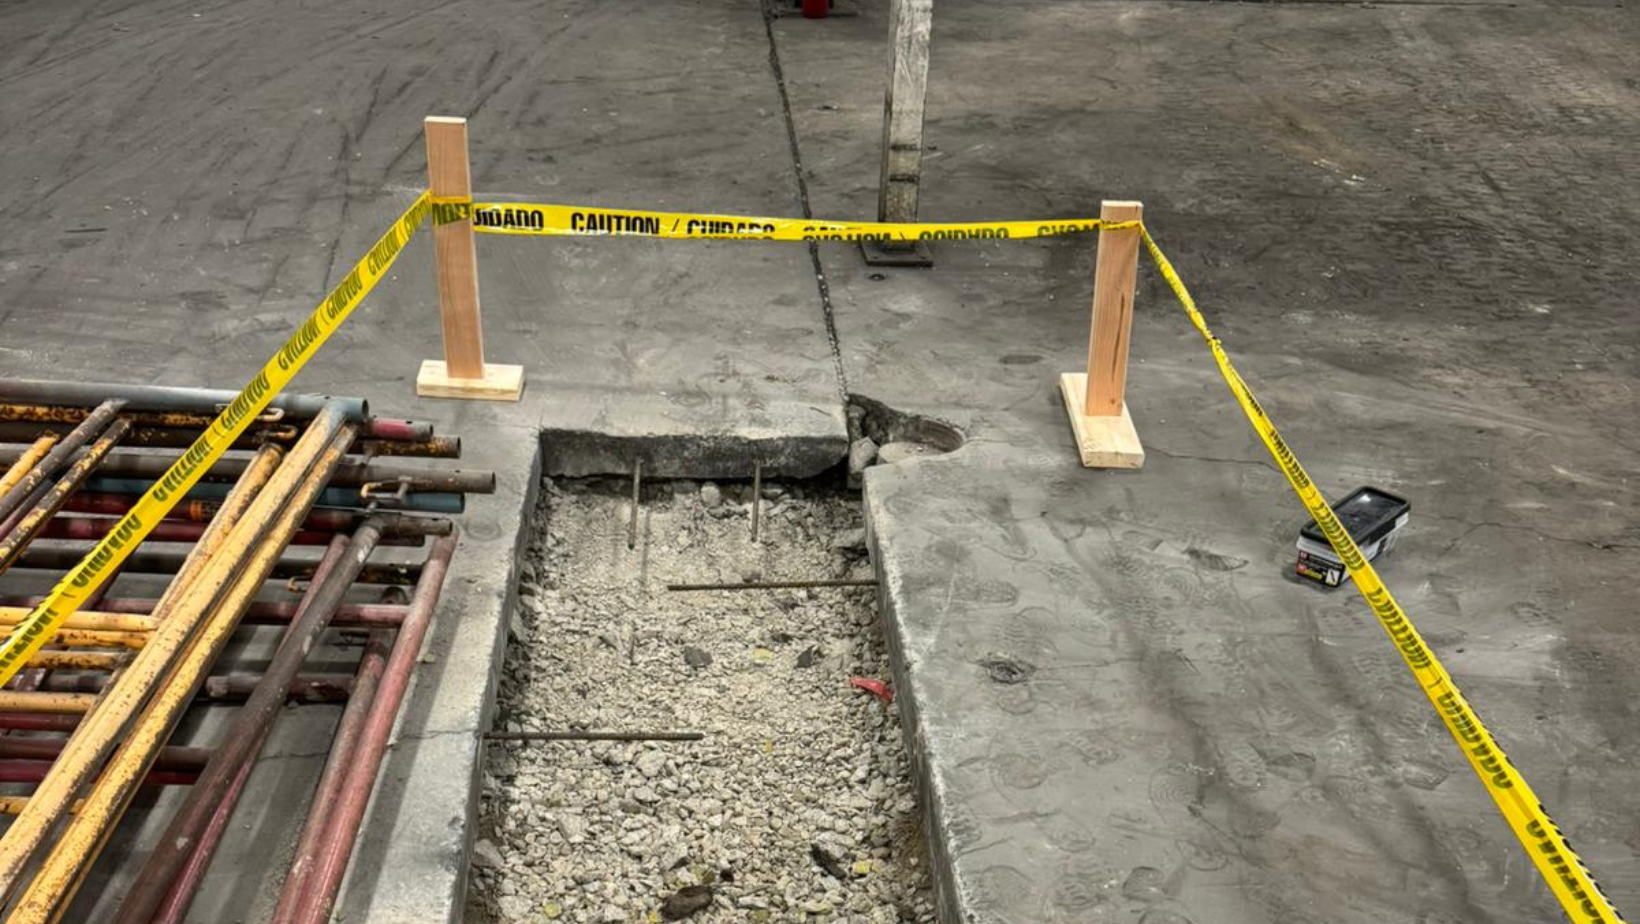 Whether you need a new concrete foundation for a commercial building, parking lot resurfacing, or concrete repairs, our team is equipped to handle it all.